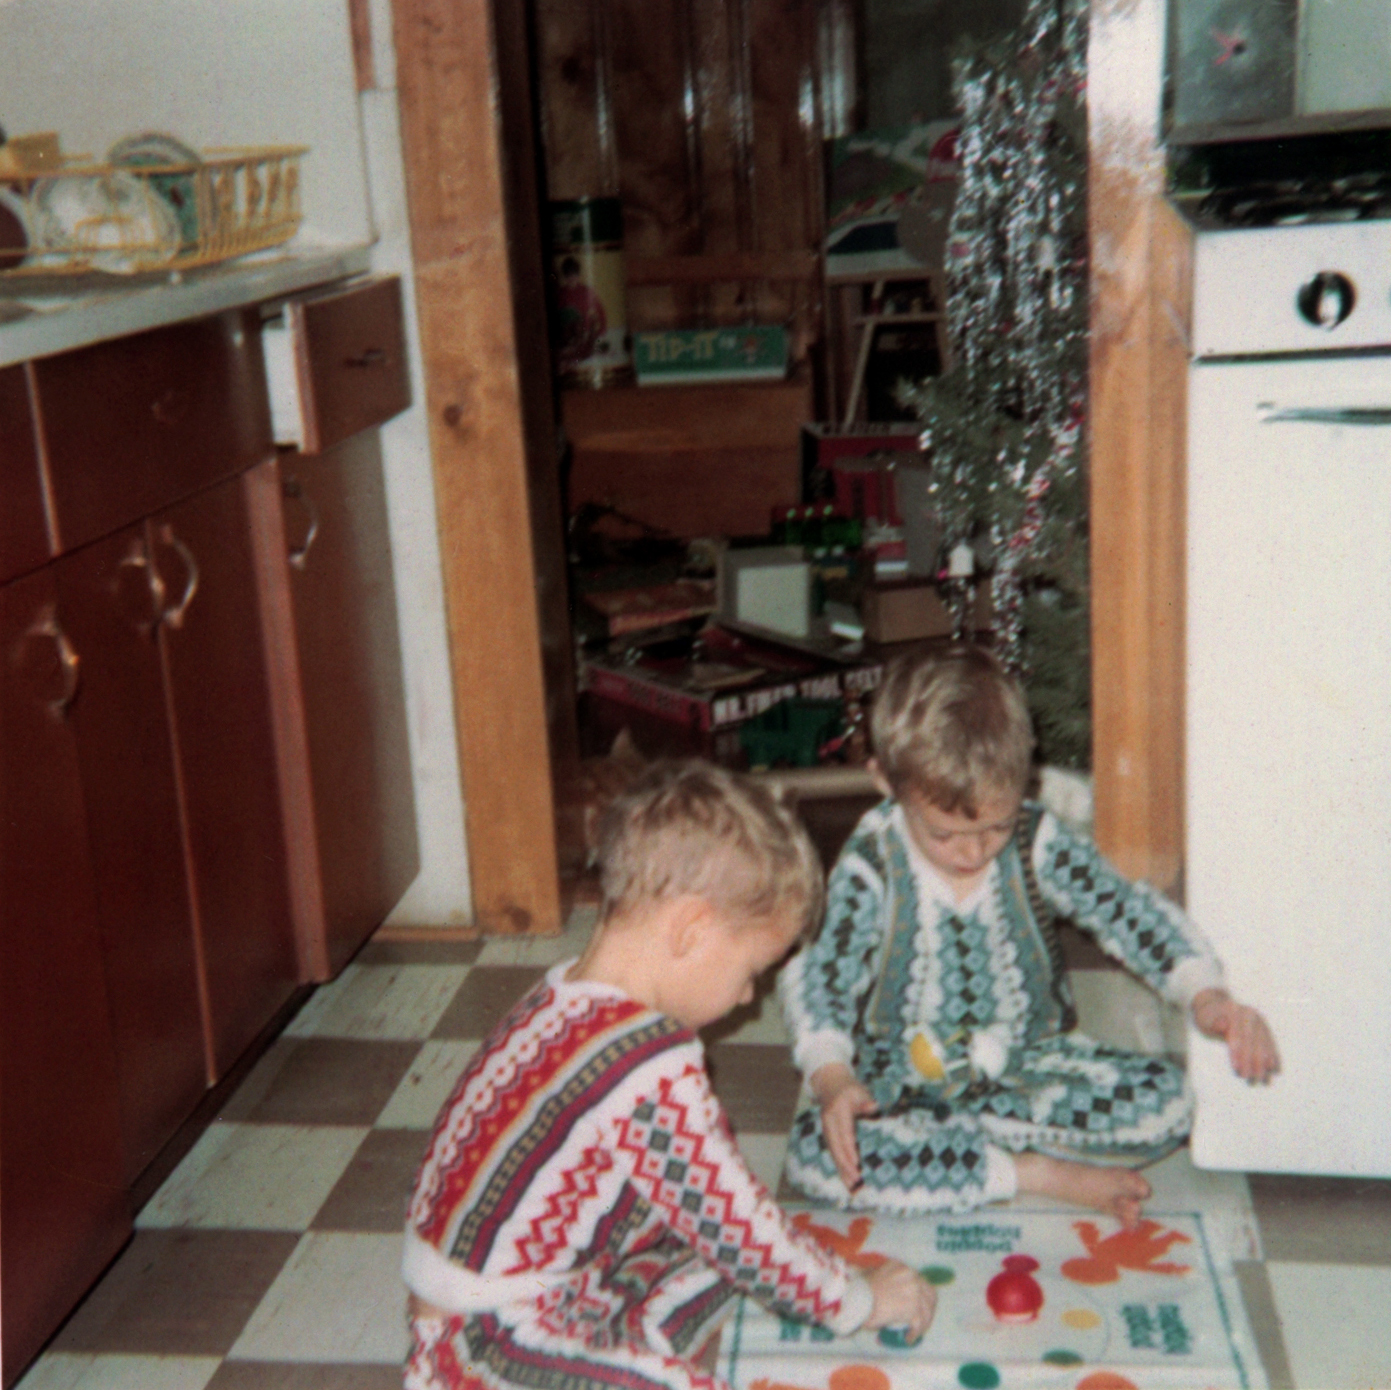 Mark and Scott at home in West Orange, N.J. on Christmas Day in 1970.